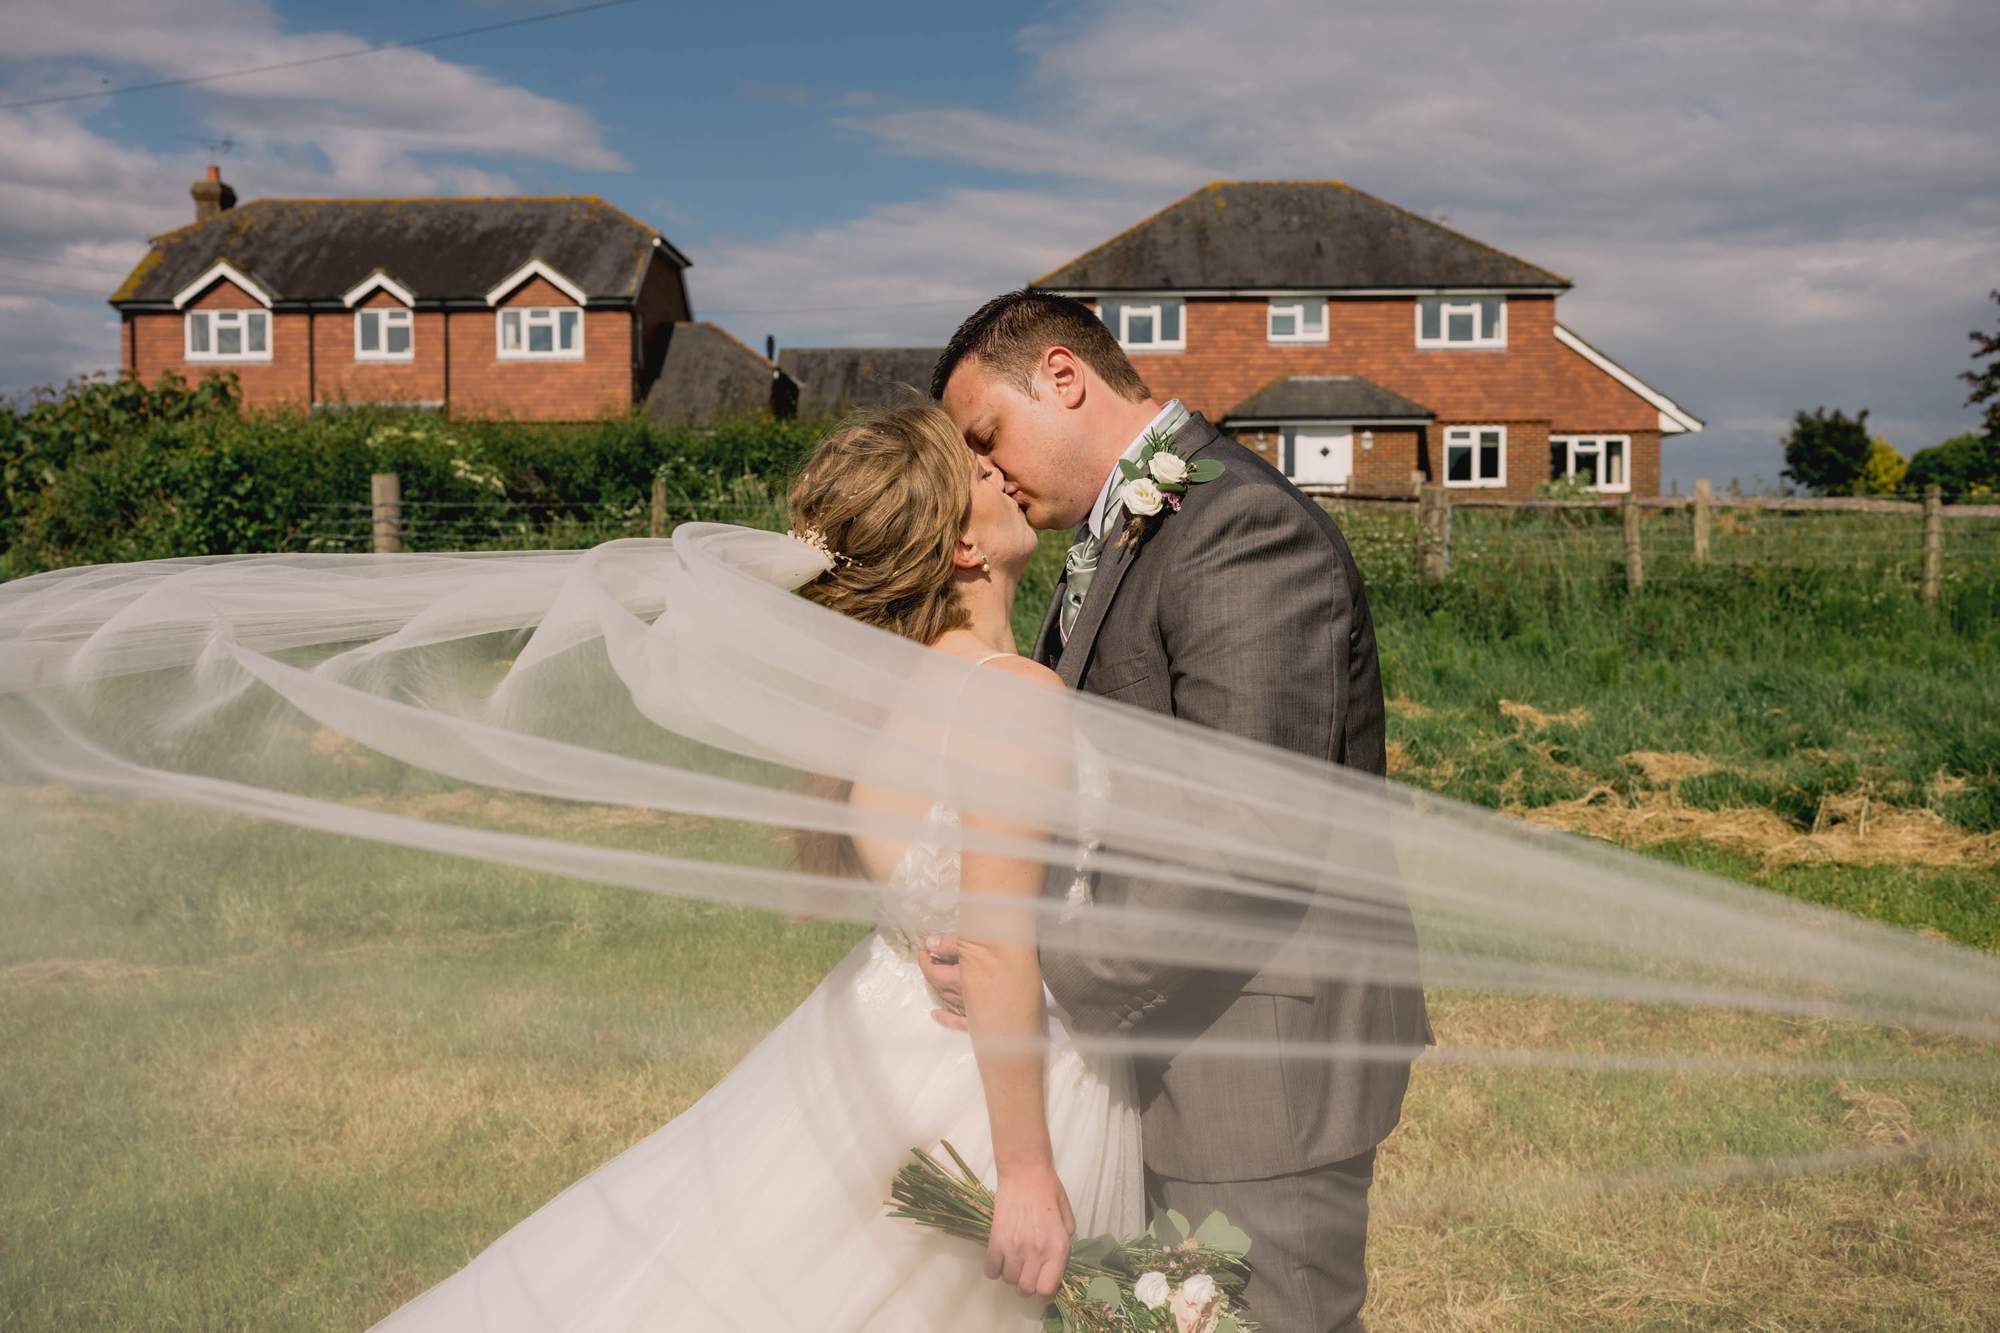 The bride's wedding veil blows in the wind at Tottington Manor in the Sussex countryside.